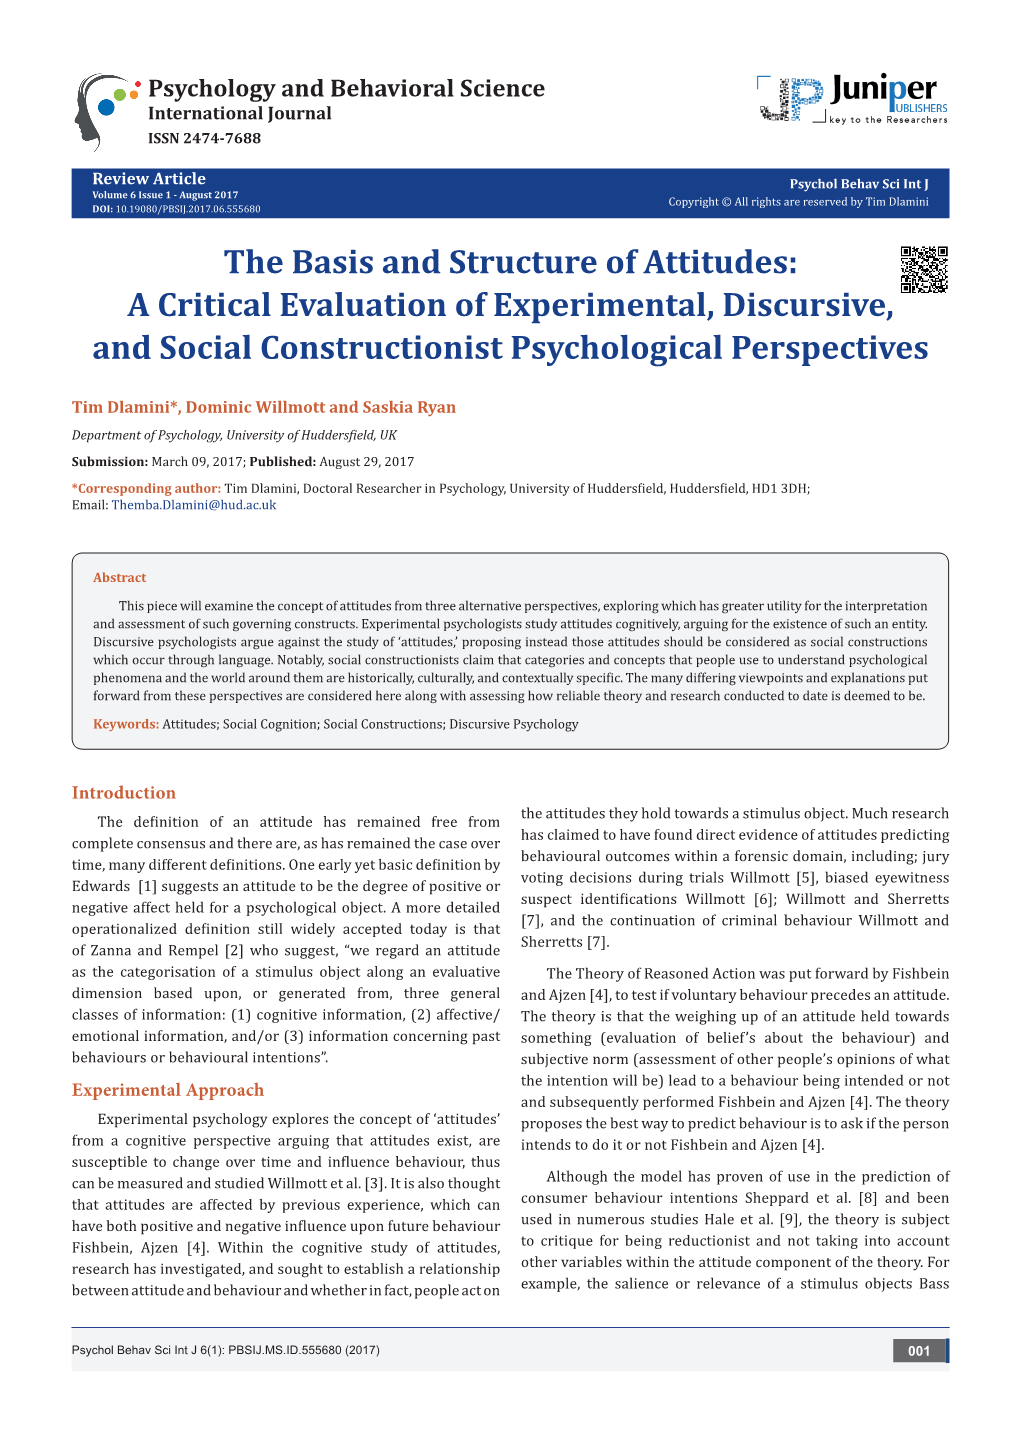 The Basis and Structure of Attitudes: a Critical Evaluation of Experimental, Discursive, and Social Constructionist Psychological Perspectives